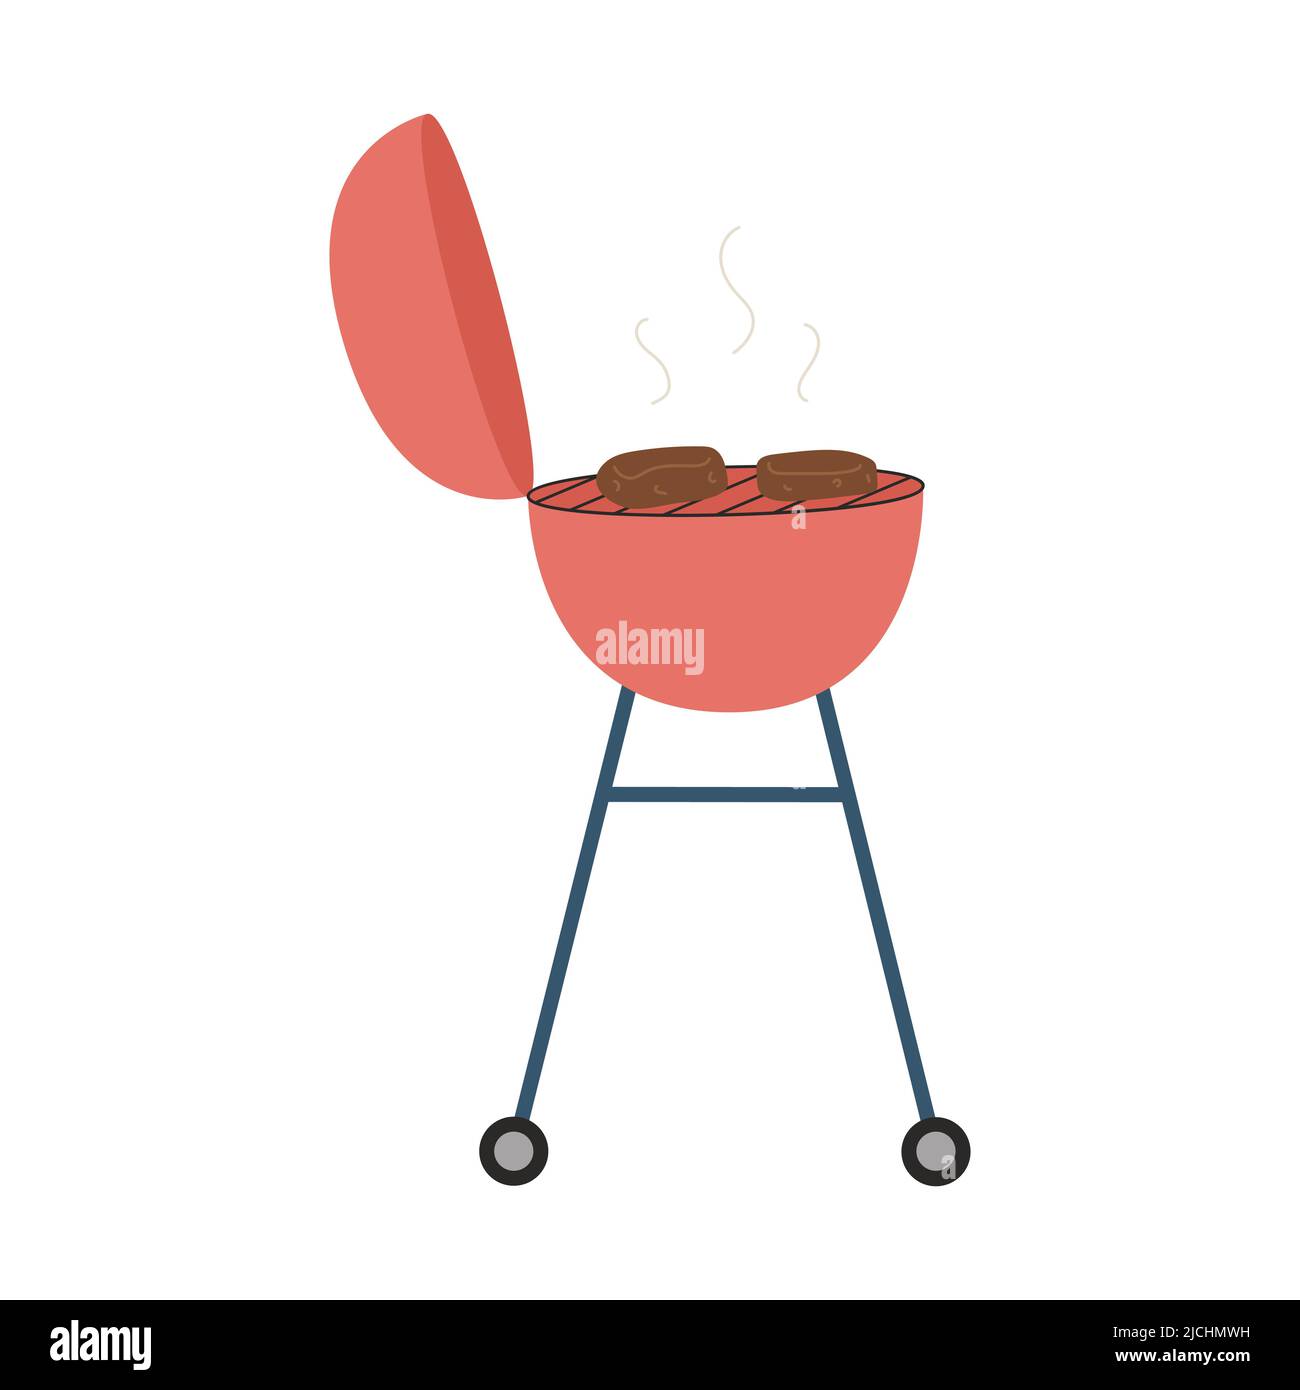 https://c8.alamy.com/comp/2JCHMWH/barbecue-grill-with-roasting-meat-steak-barbecue-equipment-for-a-party-picnic-backyard-cooking-on-coals-flat-vector-illustration-isolated-on-a-2JCHMWH.jpg